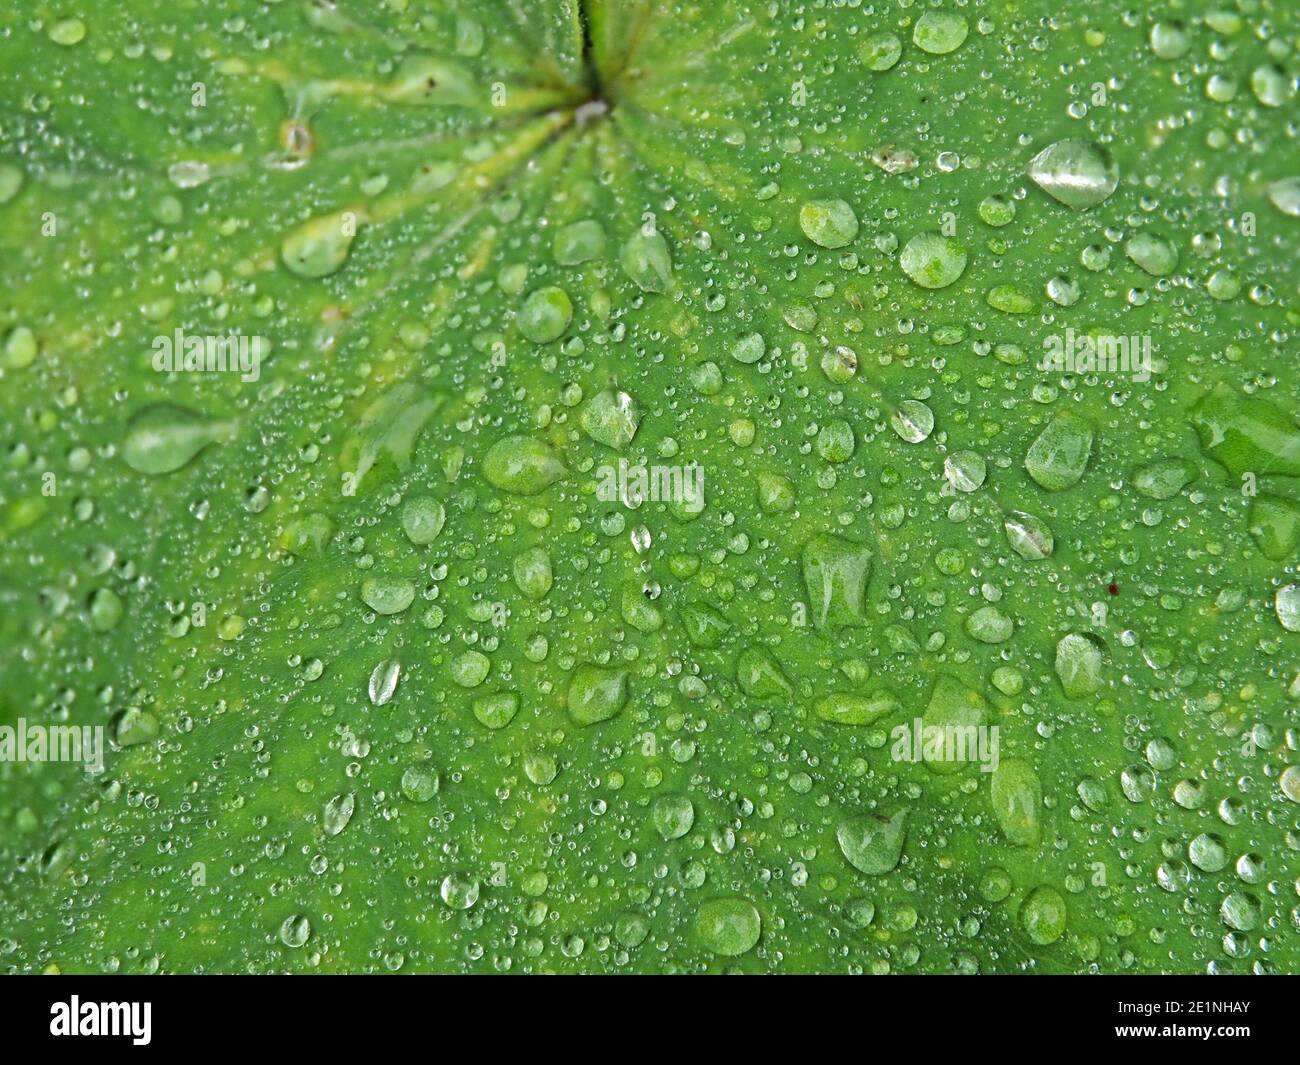 Water droplets held by soft hairs on the leaf of Alchemilla vulgaris, common lady's mantle (Nine Hooks/ Bear’s Foot/ Lion’s Foot) in Cumbria, England, Stock Photo